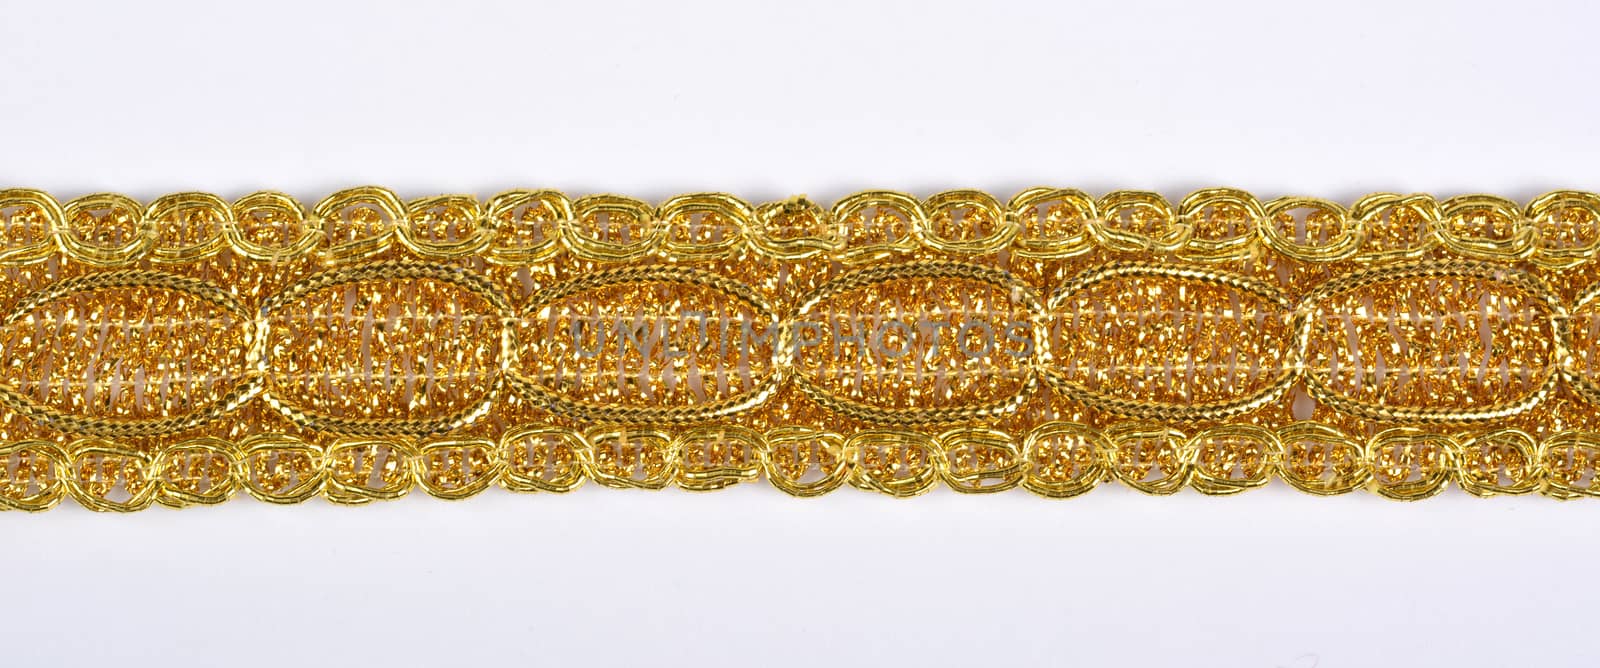 Braid lace made Luxury Metallic golden cord on white background by polyats